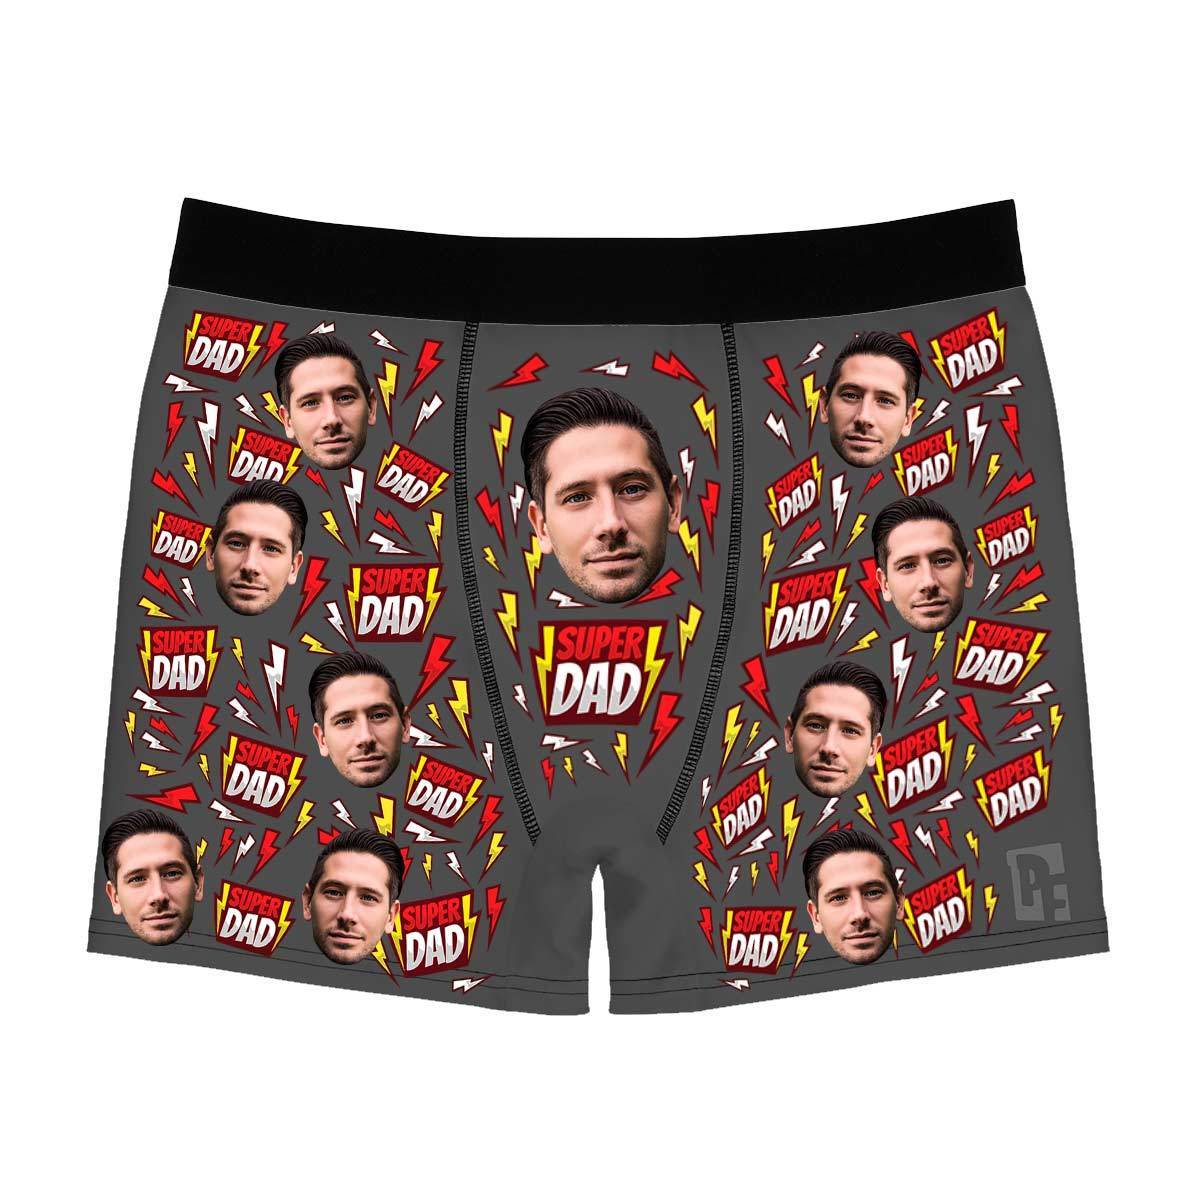 Dark Super dad men's boxer briefs personalized with photo printed on them